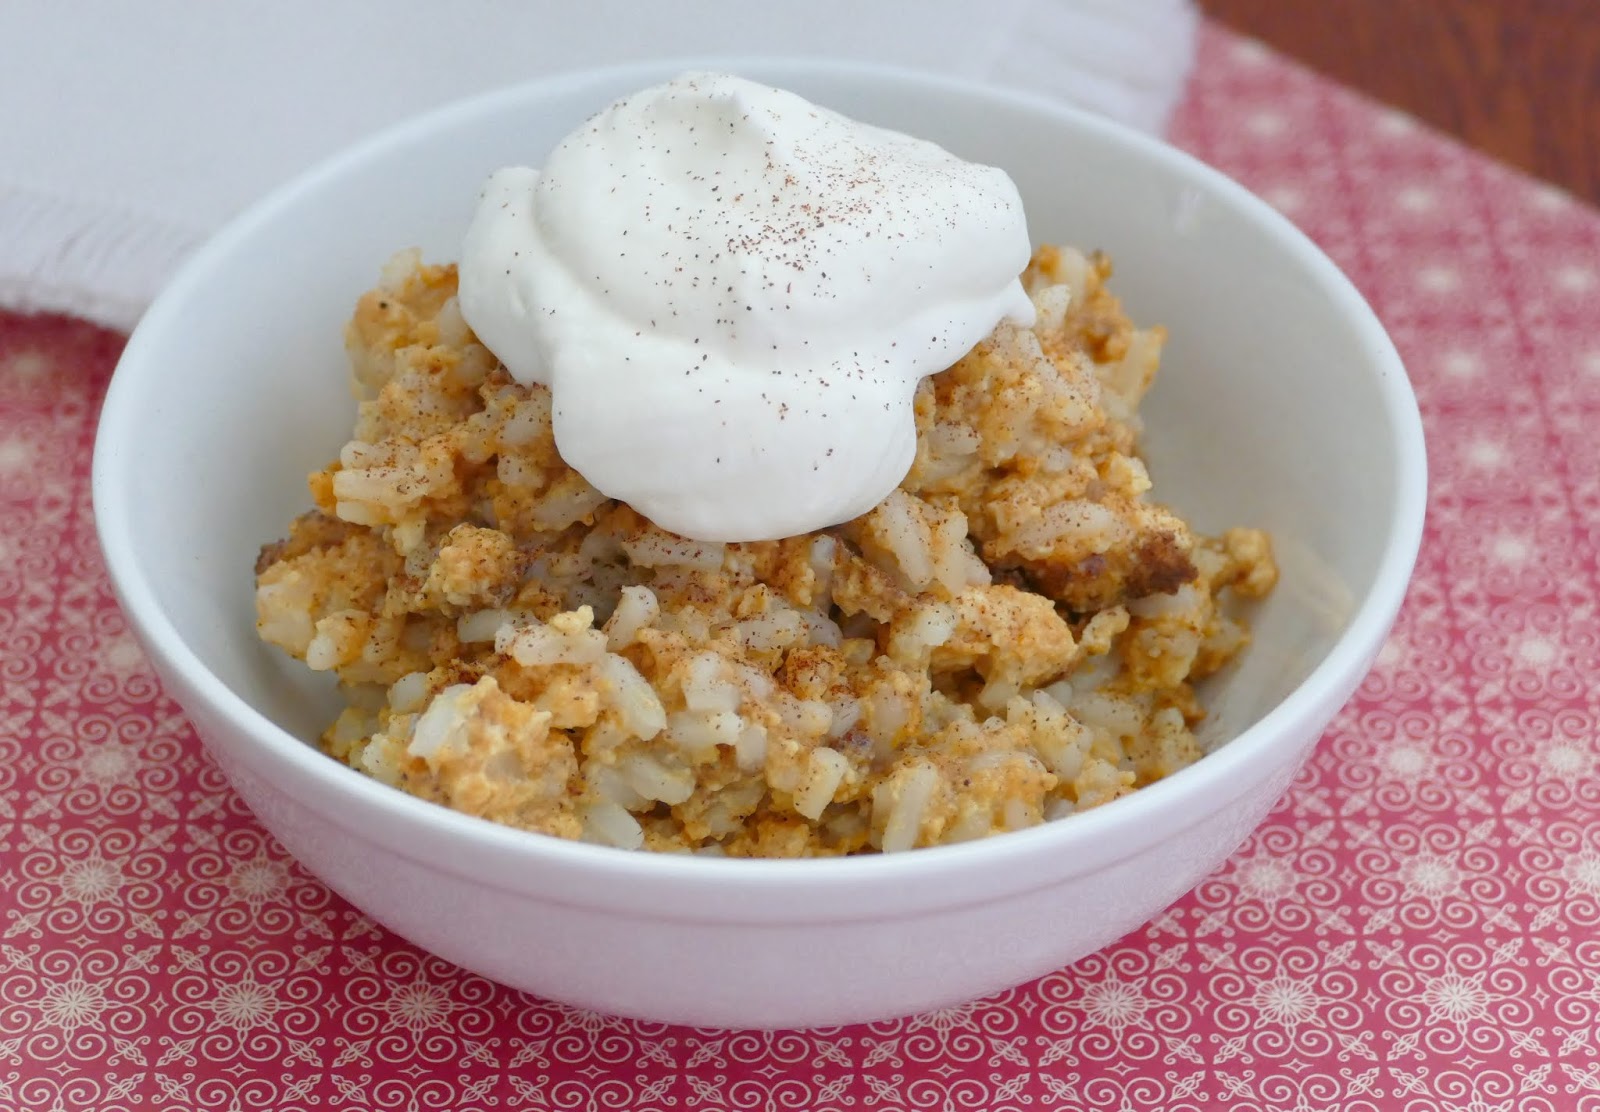 This fall pumpkin dessert pudding is delicious and so easy to make! It's a great way to use leftover rice and it's best with whipped cream and cinnamon sprinkled on top!